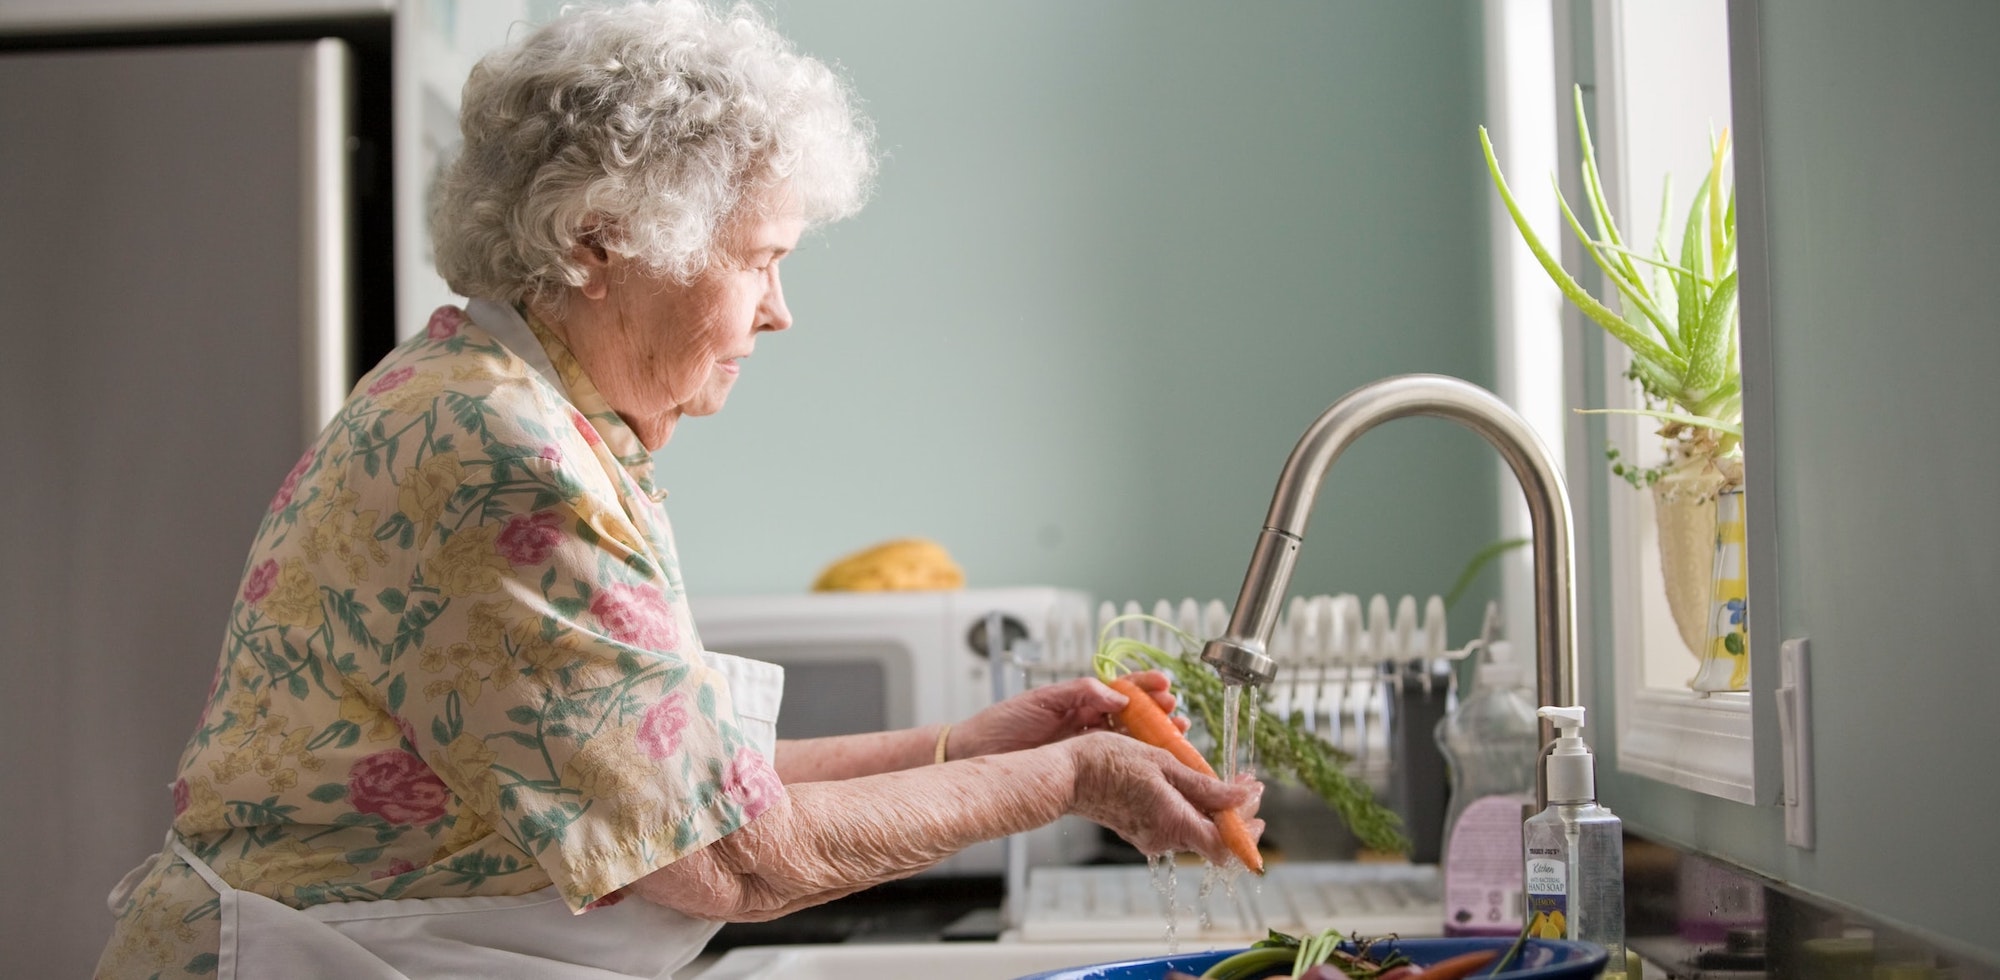 Elderly woman preparing a meal and at sink washing carrots